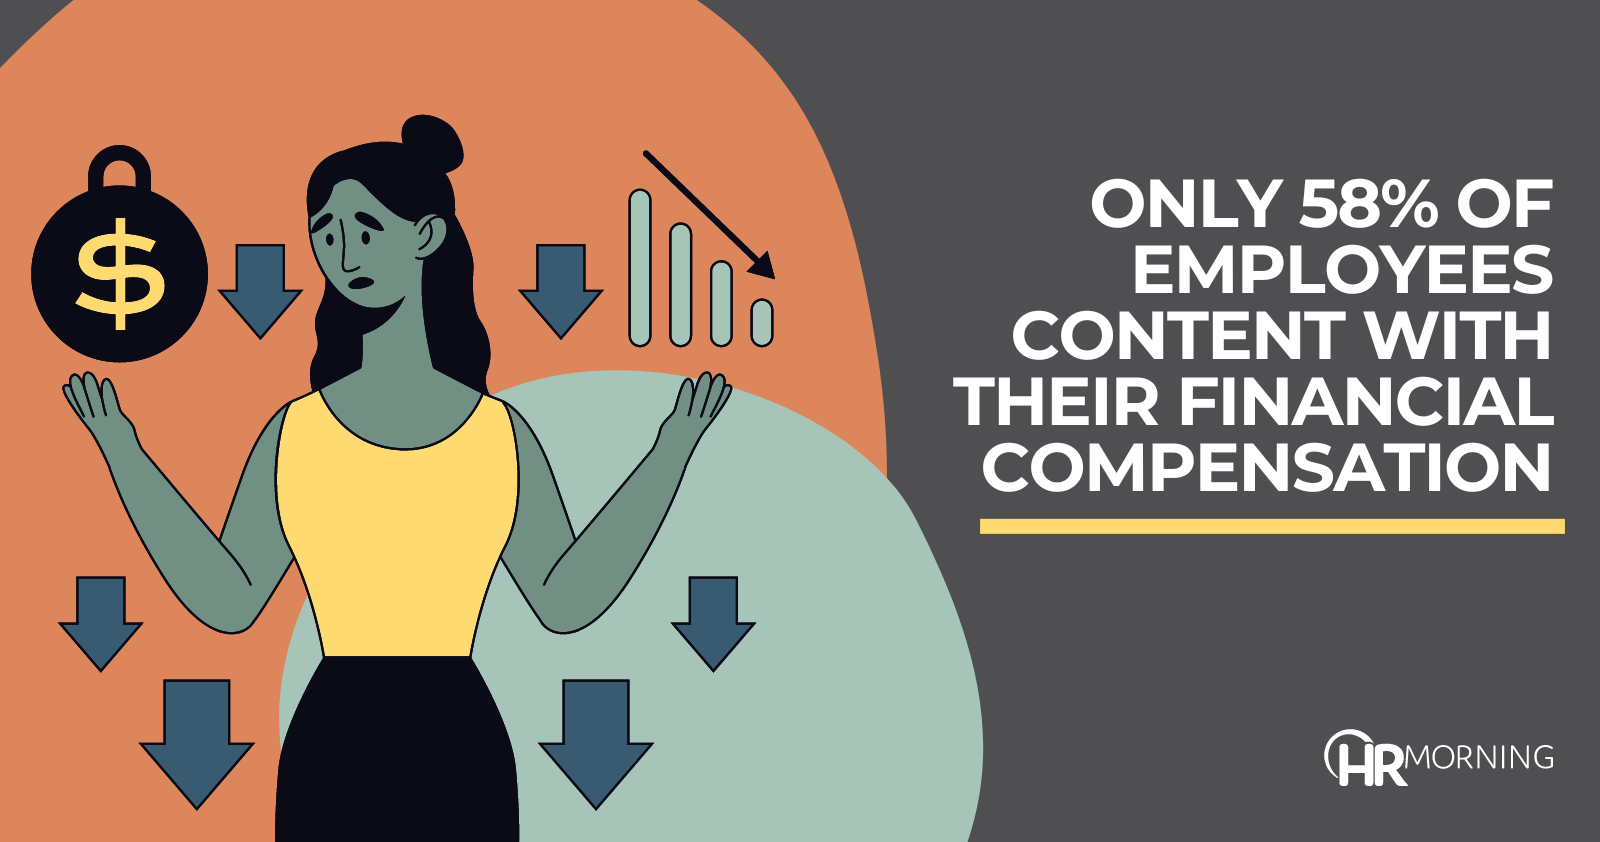 Only 58% of employees content with their financial compensation